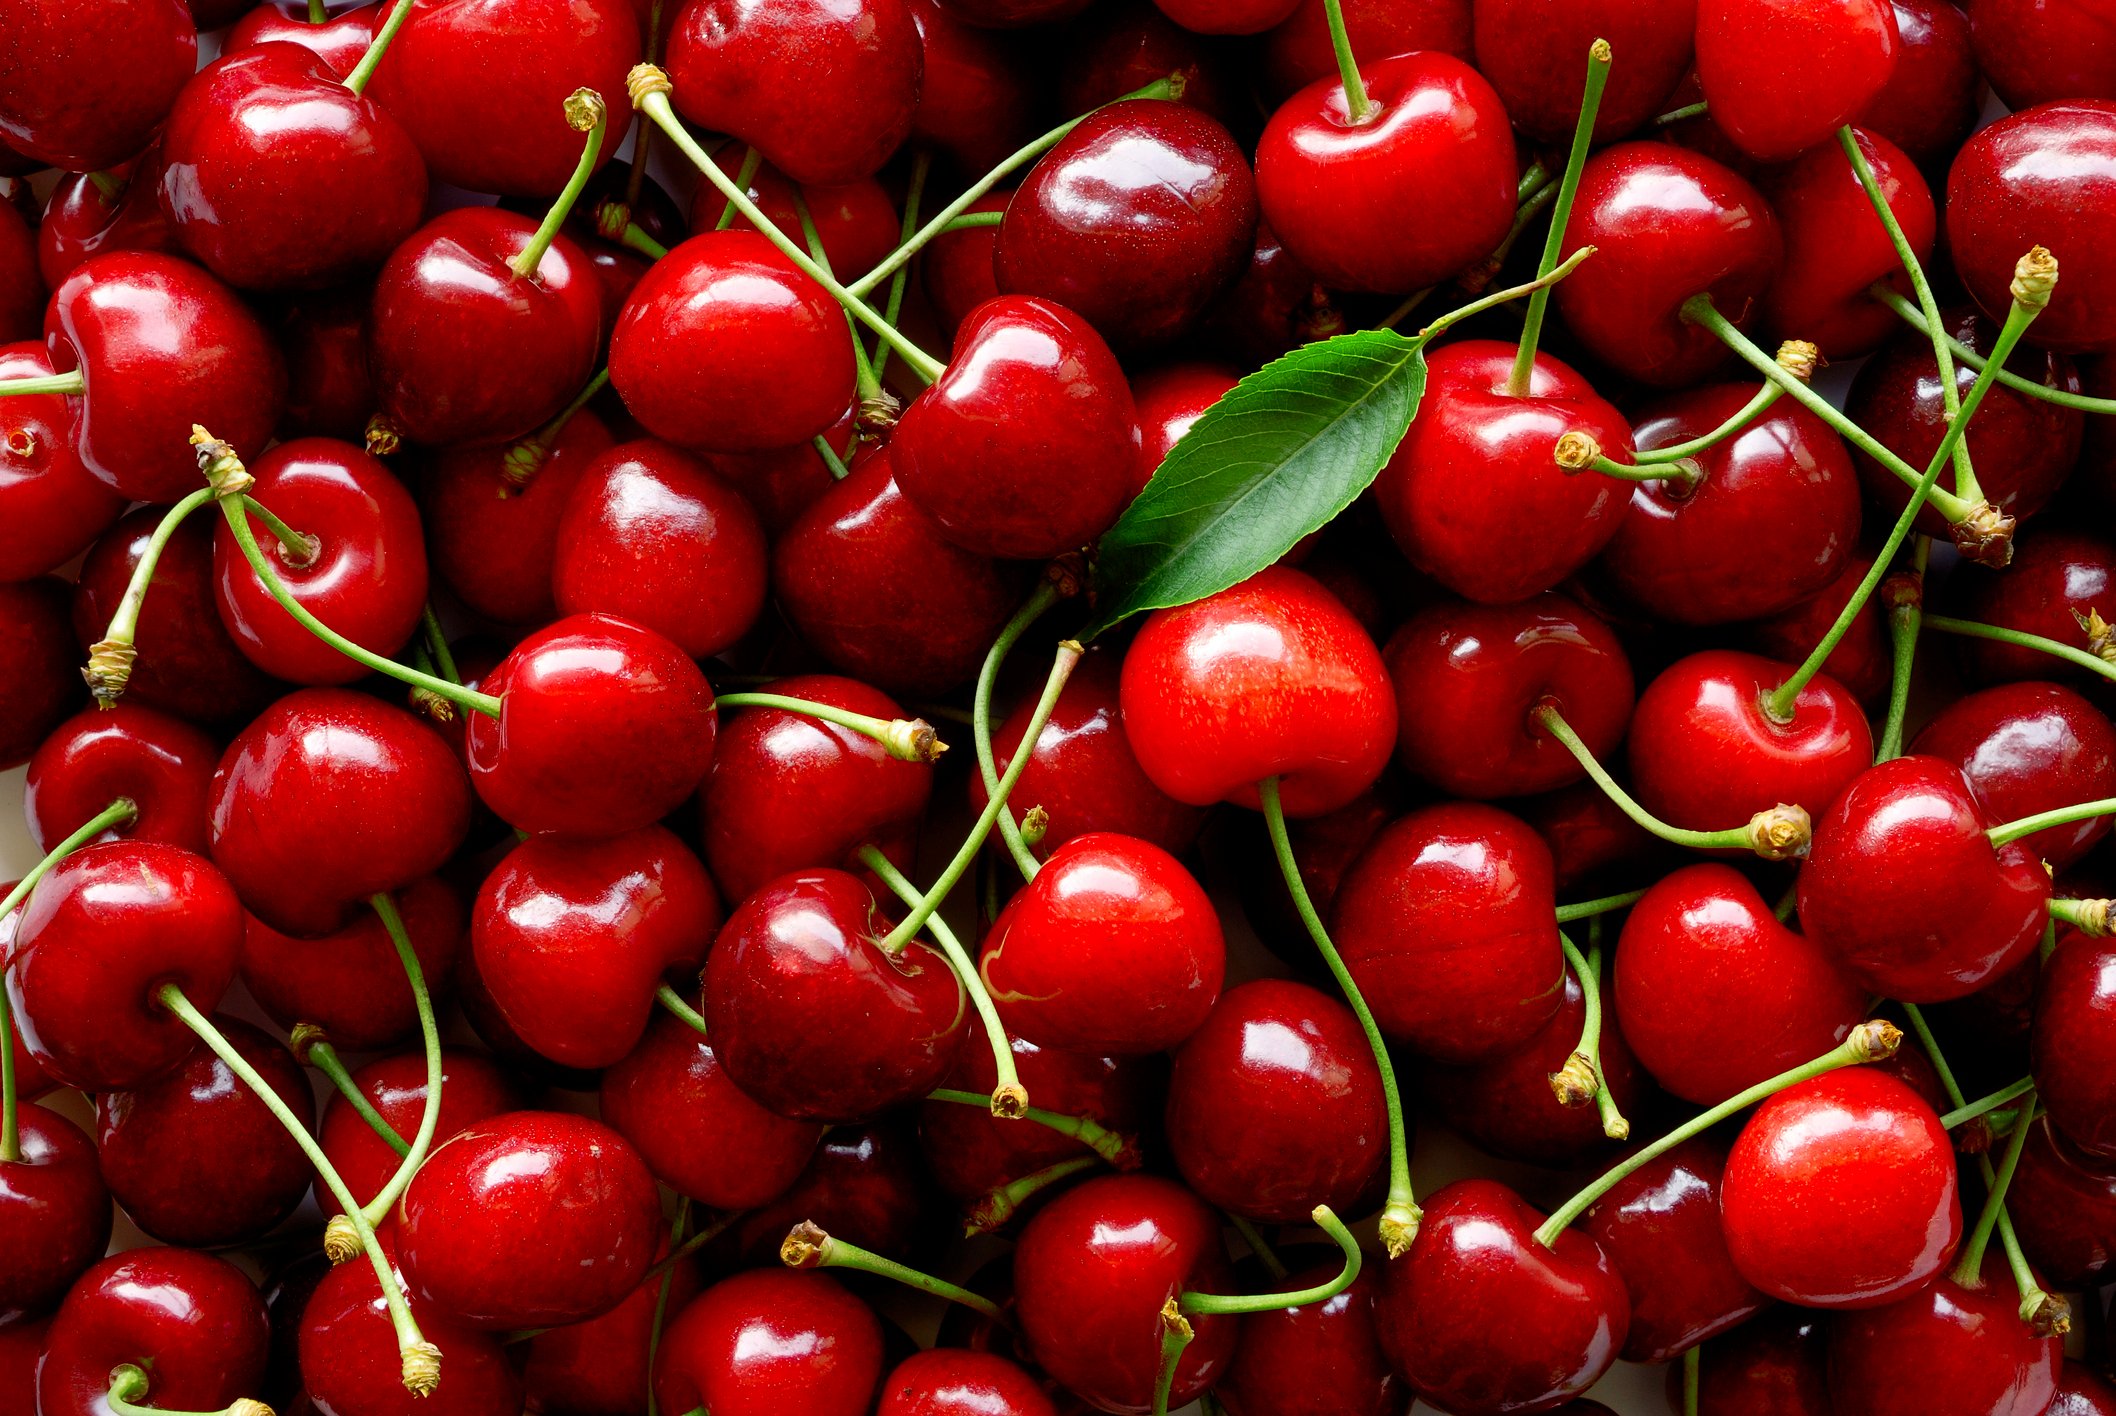 Sweet cherries are usually lighter shades of red compared with the sour kind. (iStock Photo)